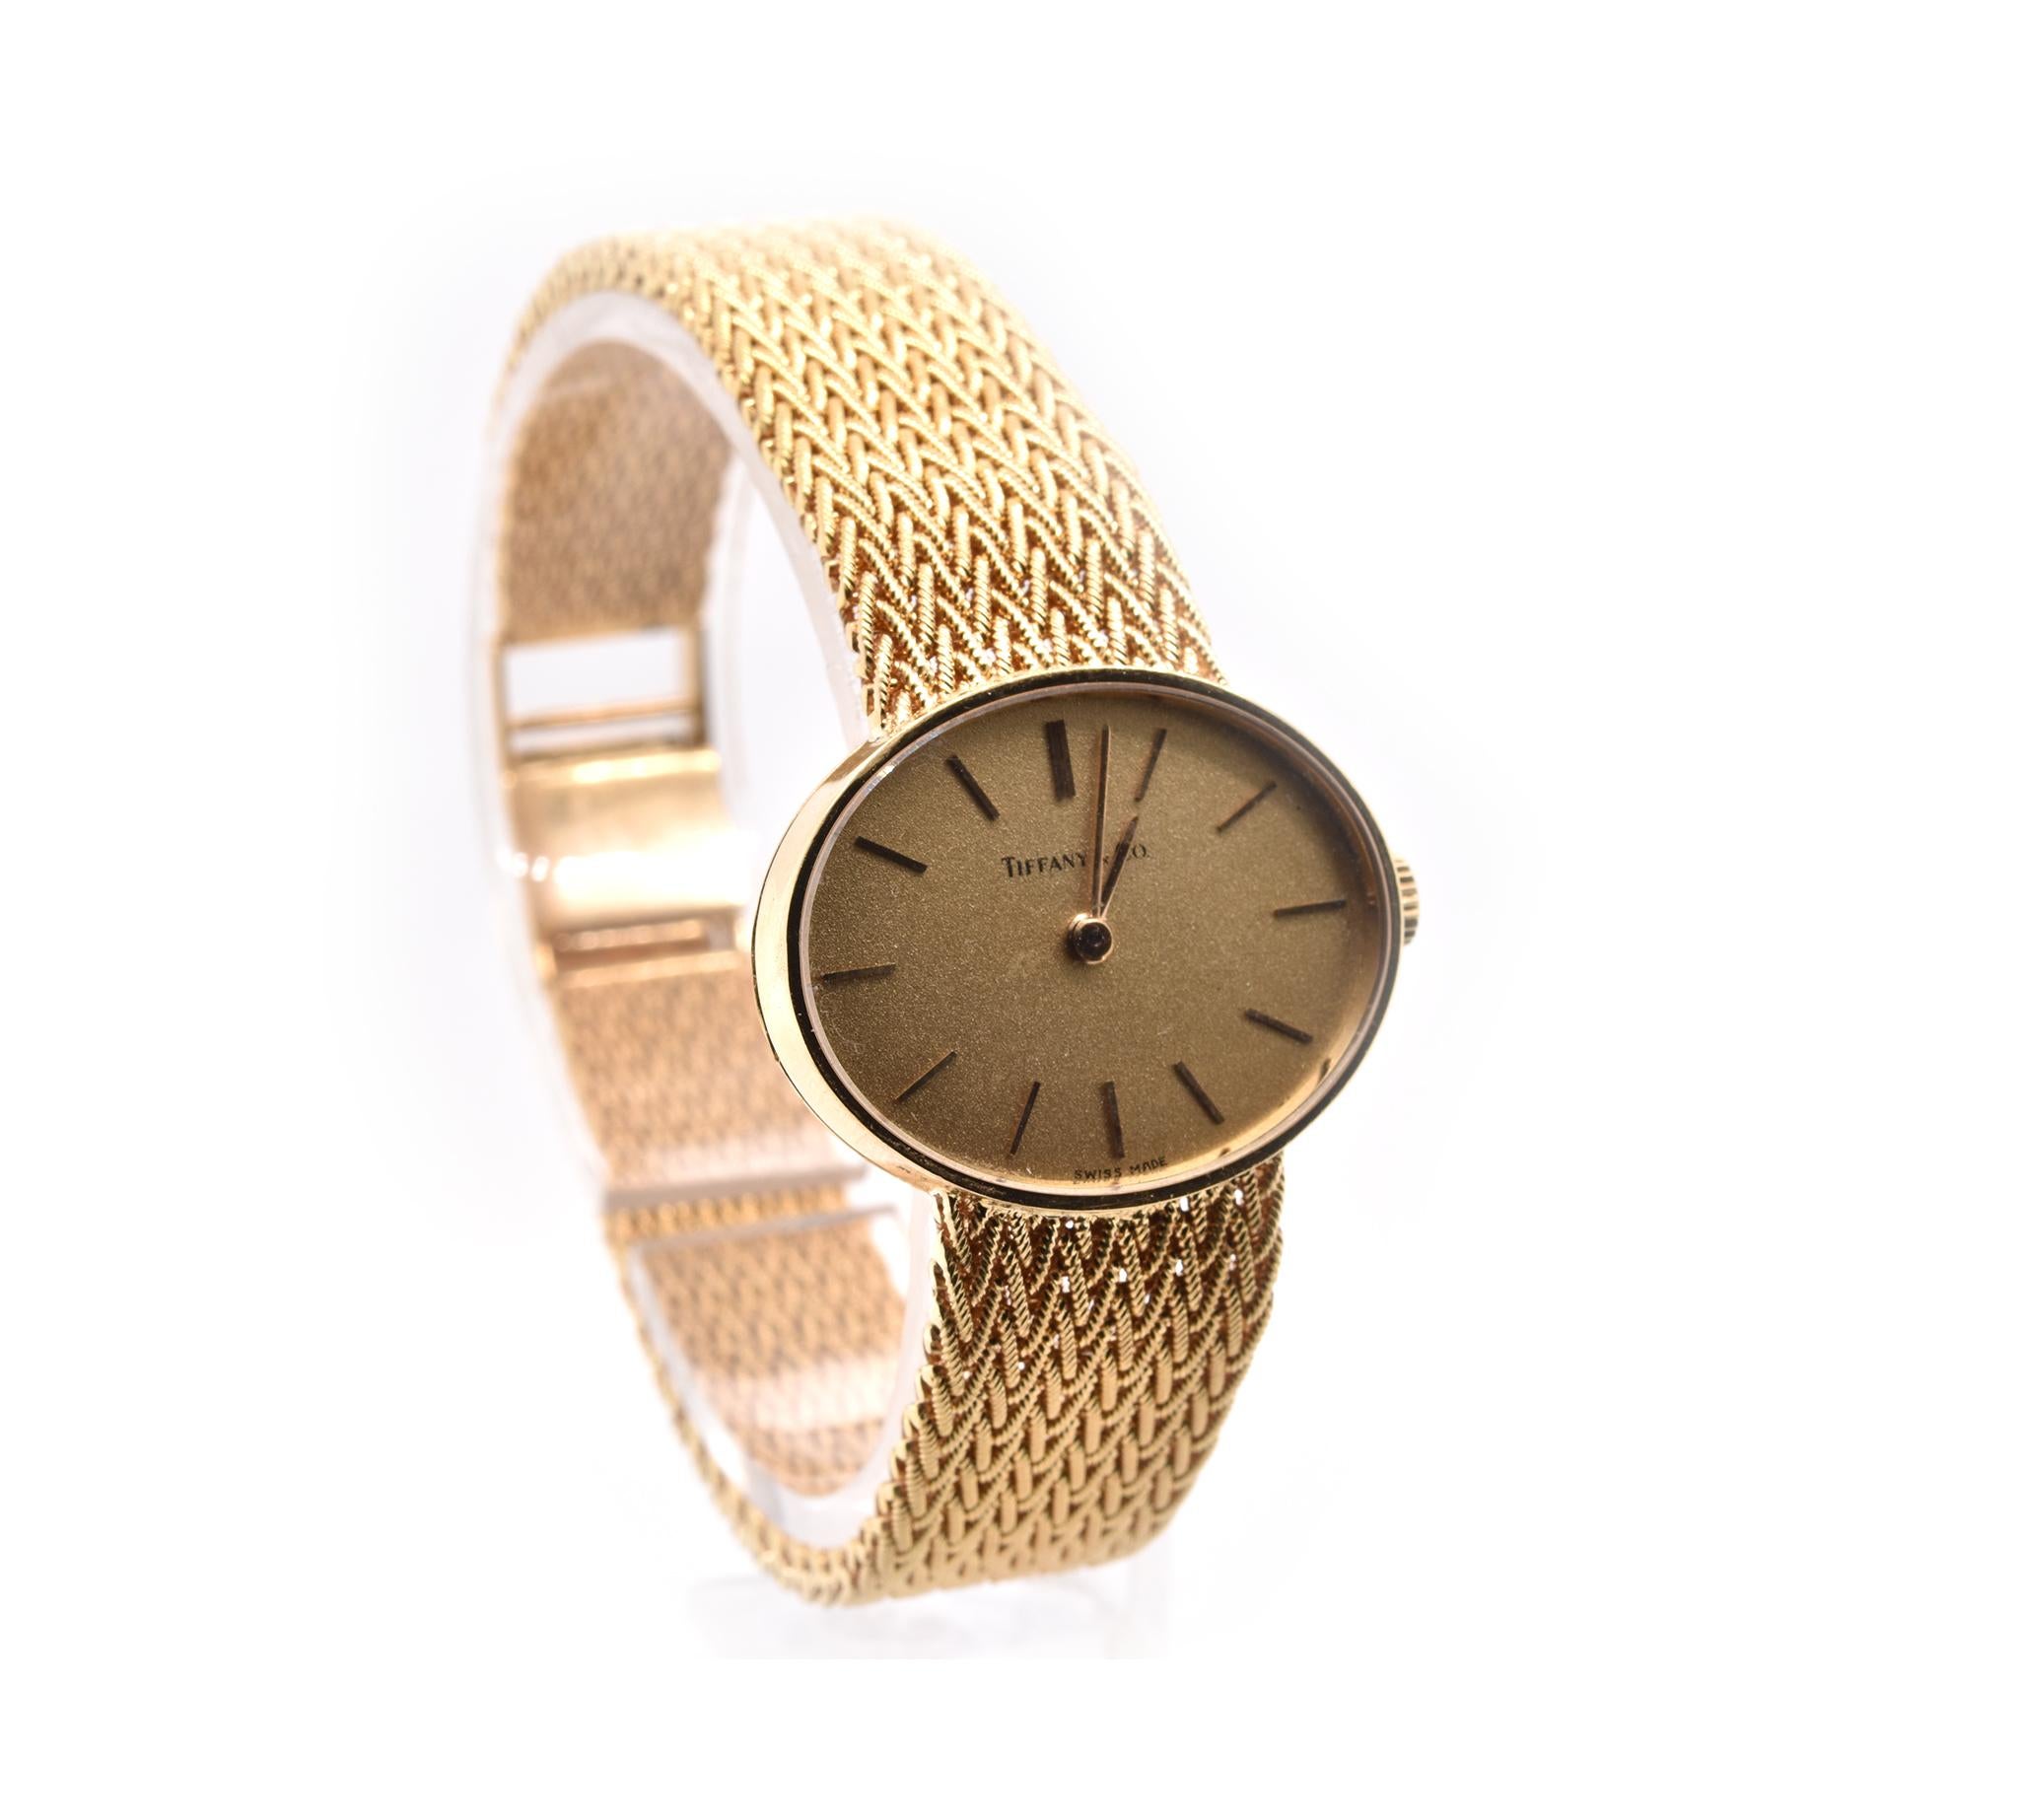 Movement: automatic
Function: hours, minutes
Case: 26mm x 21mm yellow gold case, sapphire crystal, push/pull crown
Band: T&Co yellow gold mesh bracelet with ladder clasp
Dial: champagne dial, gold stick hour markers
Serial#: 53XXX
Reference#: